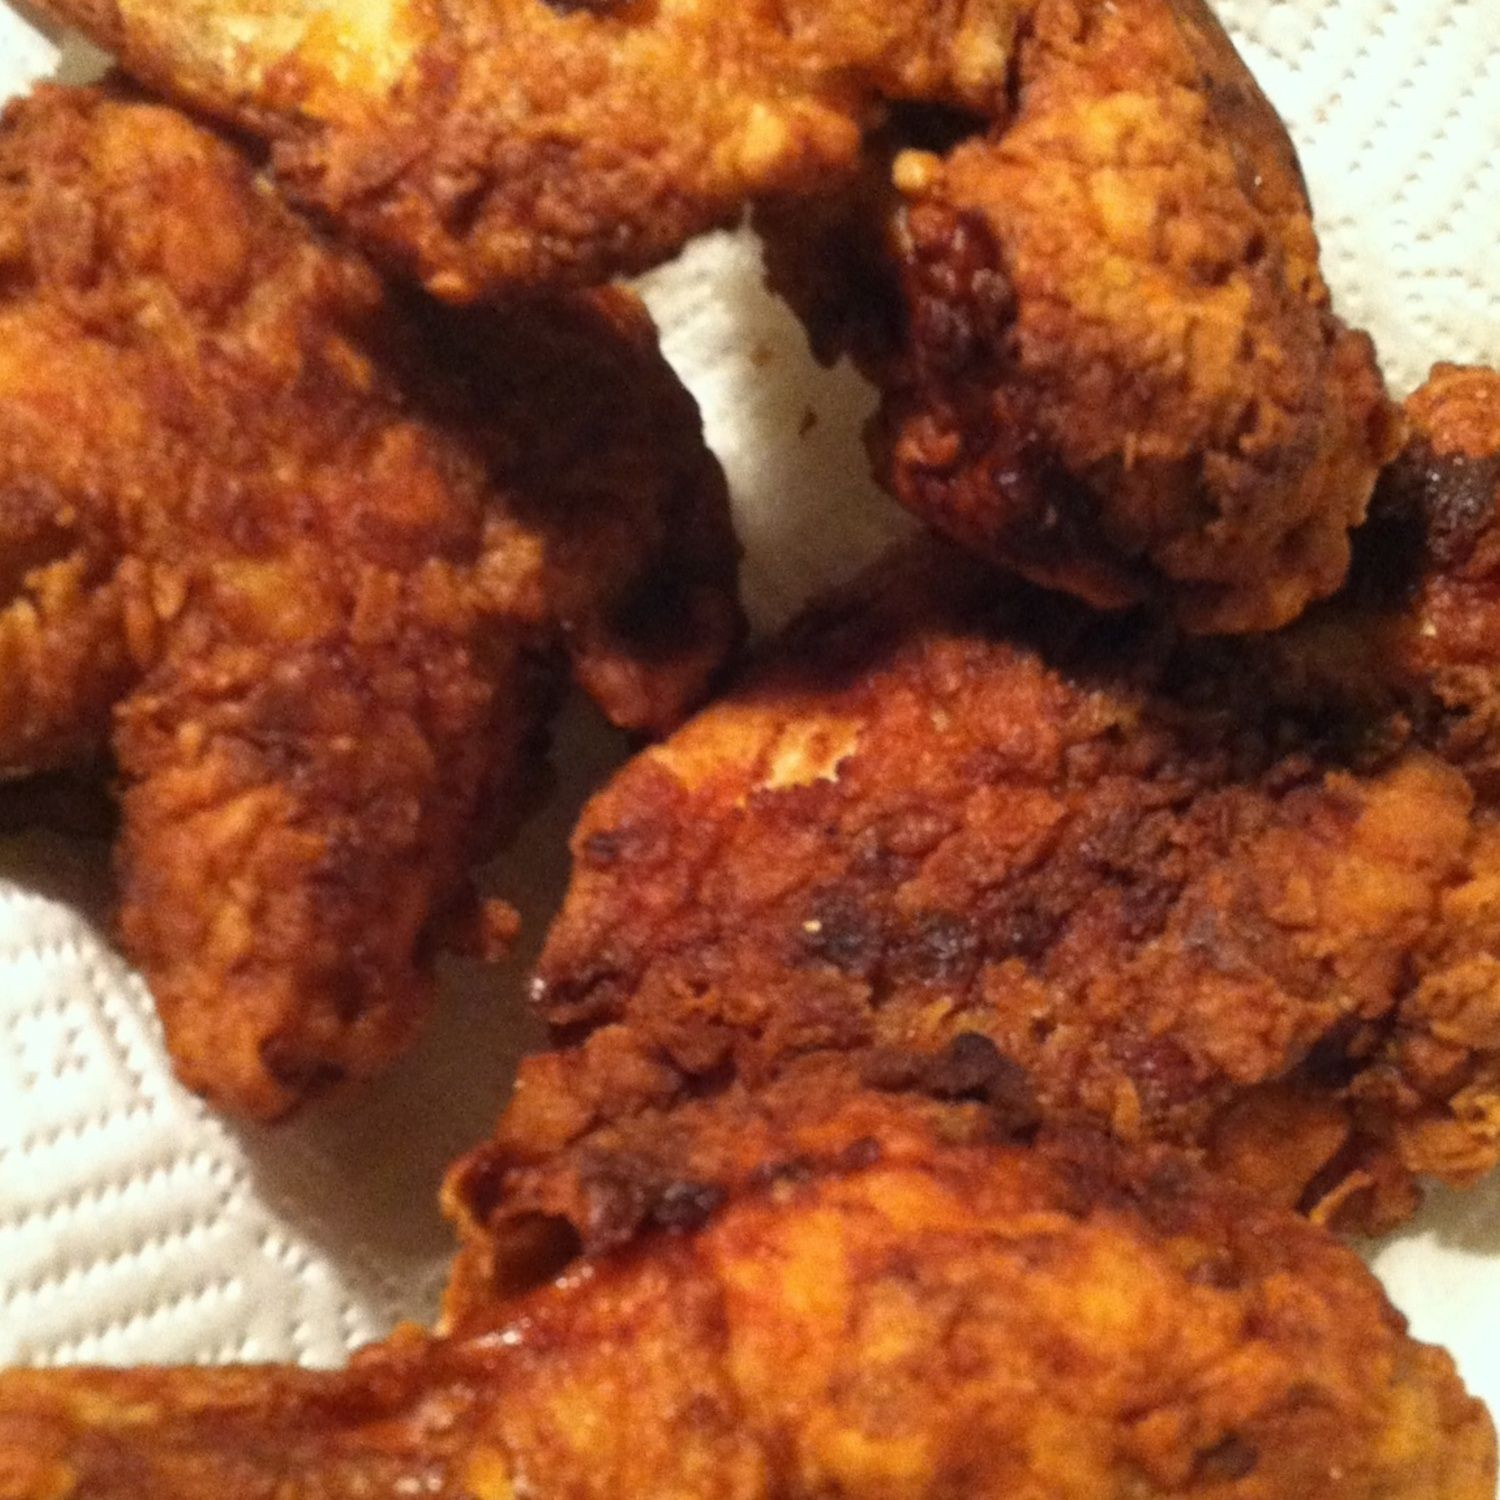 Fried Chicken In Pressure Cooker
 "As Close to KFC as I Can Get it" Fried Chicken